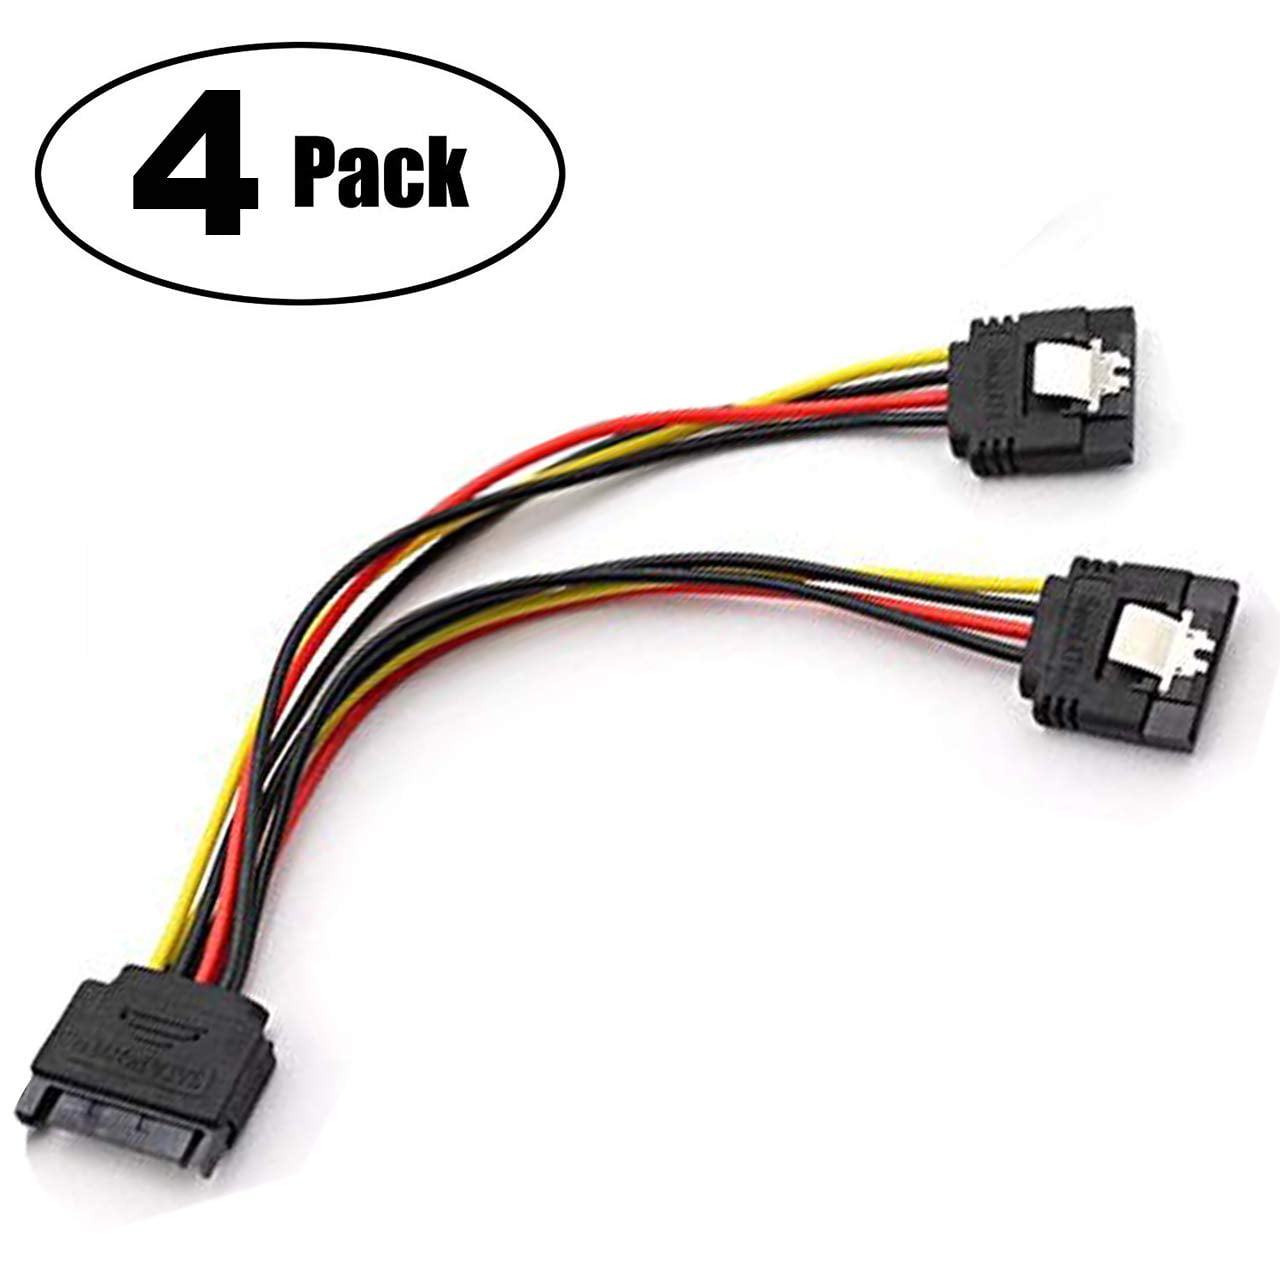 SATA Power Splitter Cable, SSD Power Cable HDD Power Cable Hard Power Cable SATA Pin Male to - Walmart.com